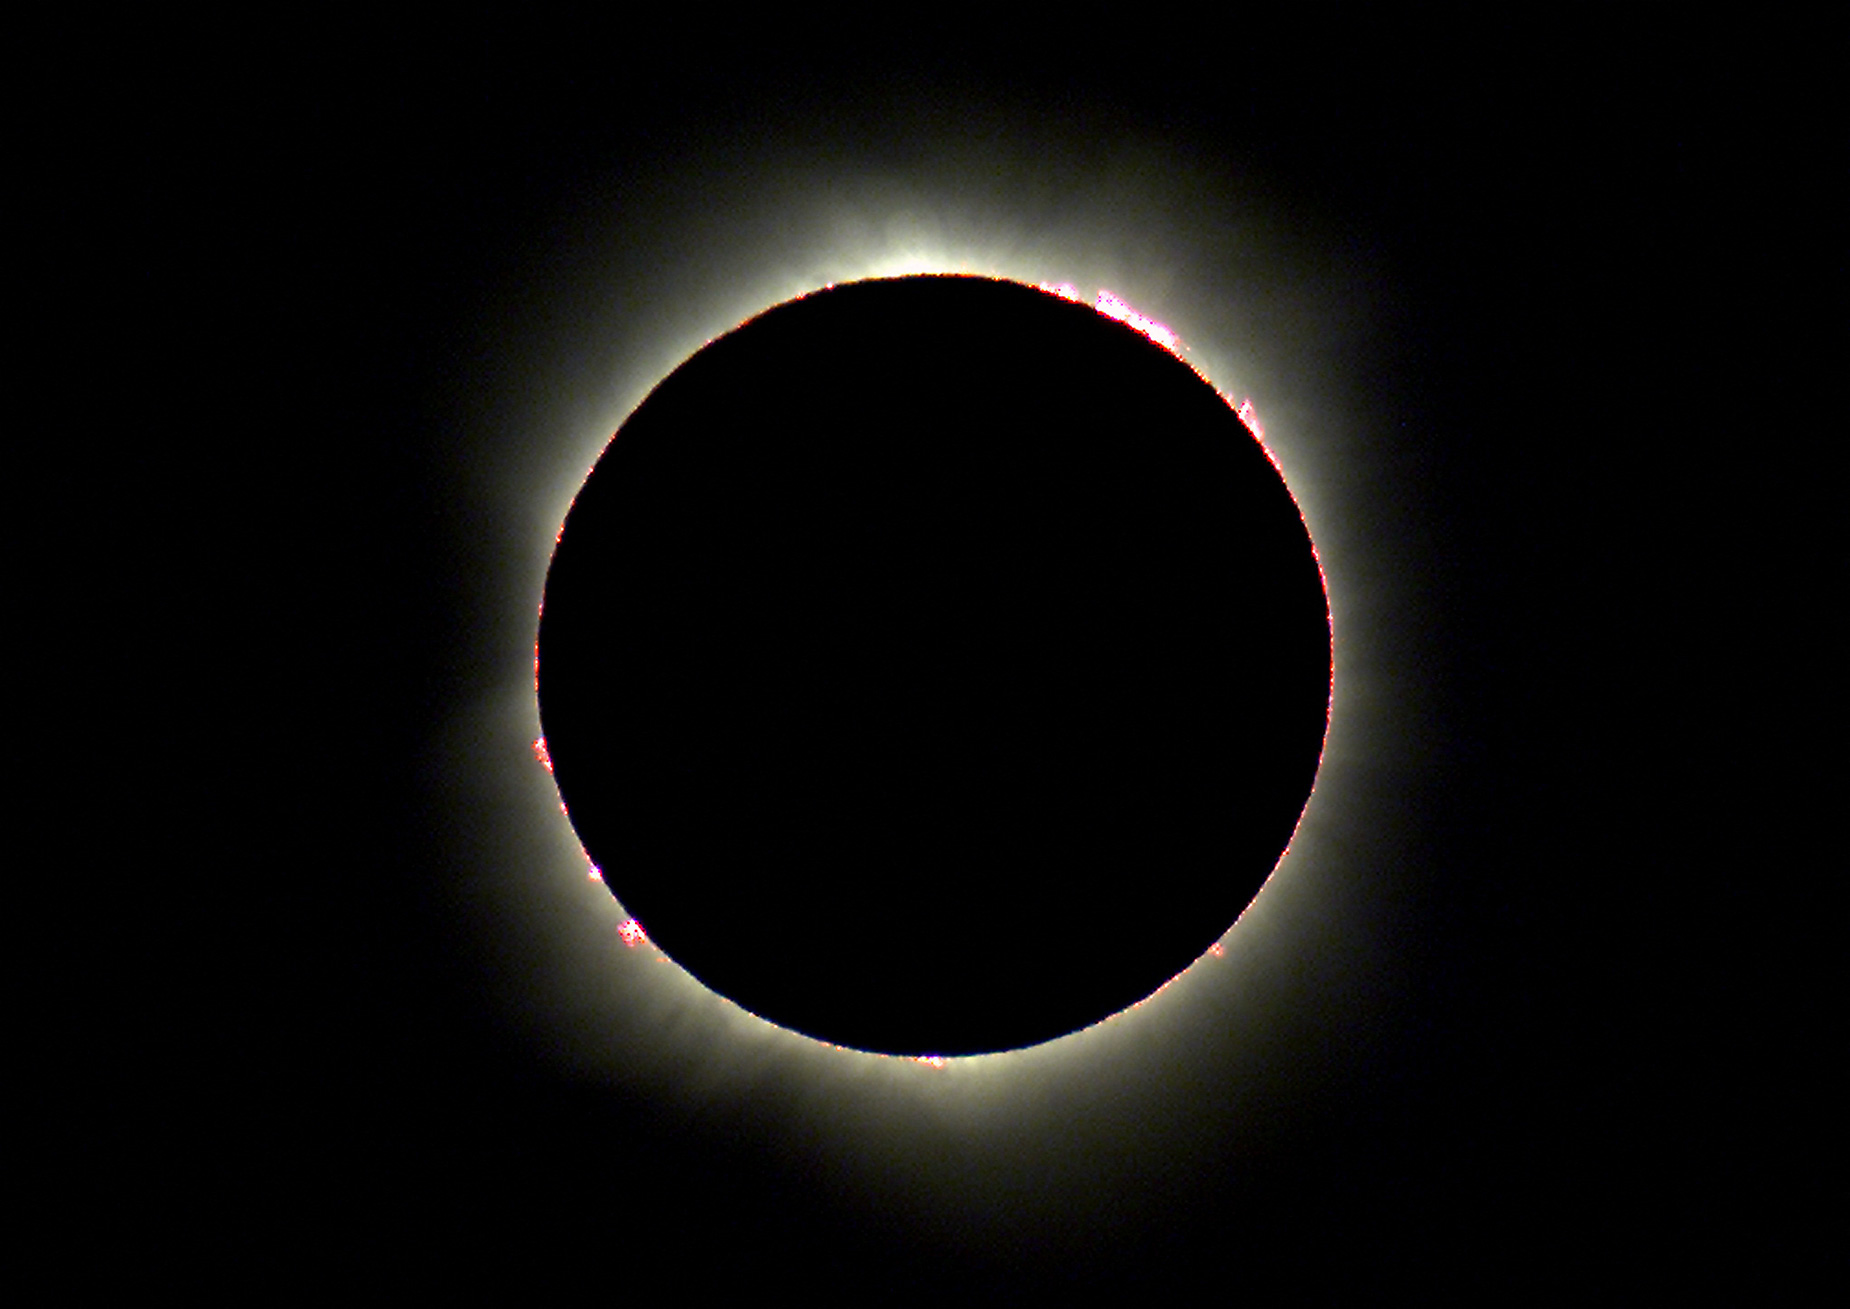 Baily's Beads flare from the corona during a total solar eclipse in Woomera, Australia, in December 2002.